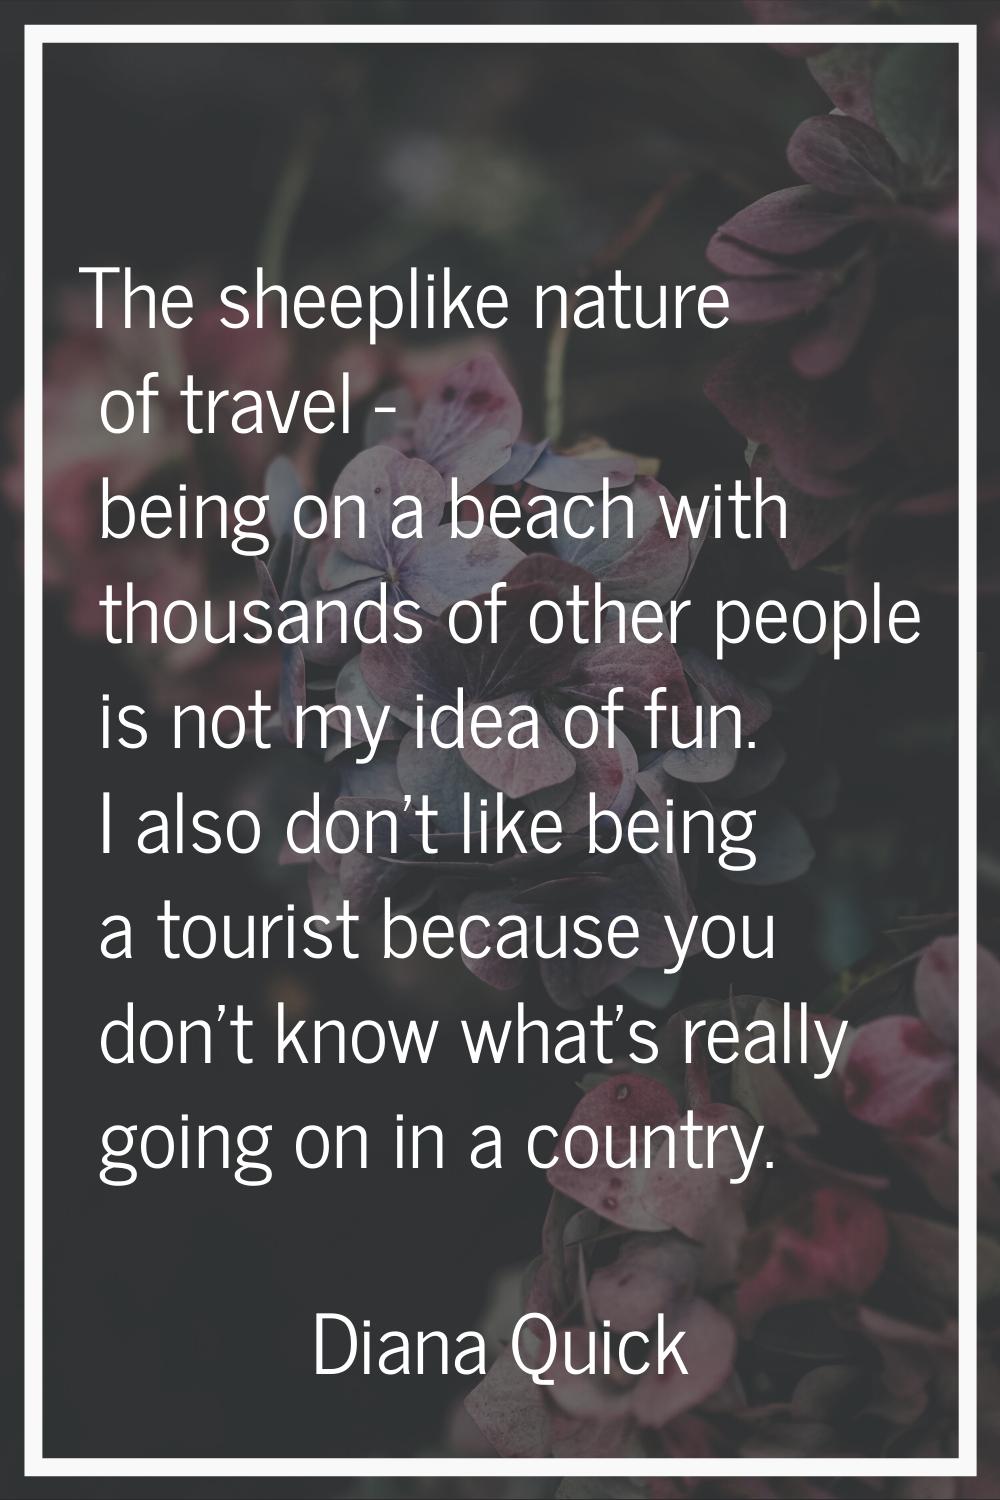 The sheeplike nature of travel - being on a beach with thousands of other people is not my idea of 